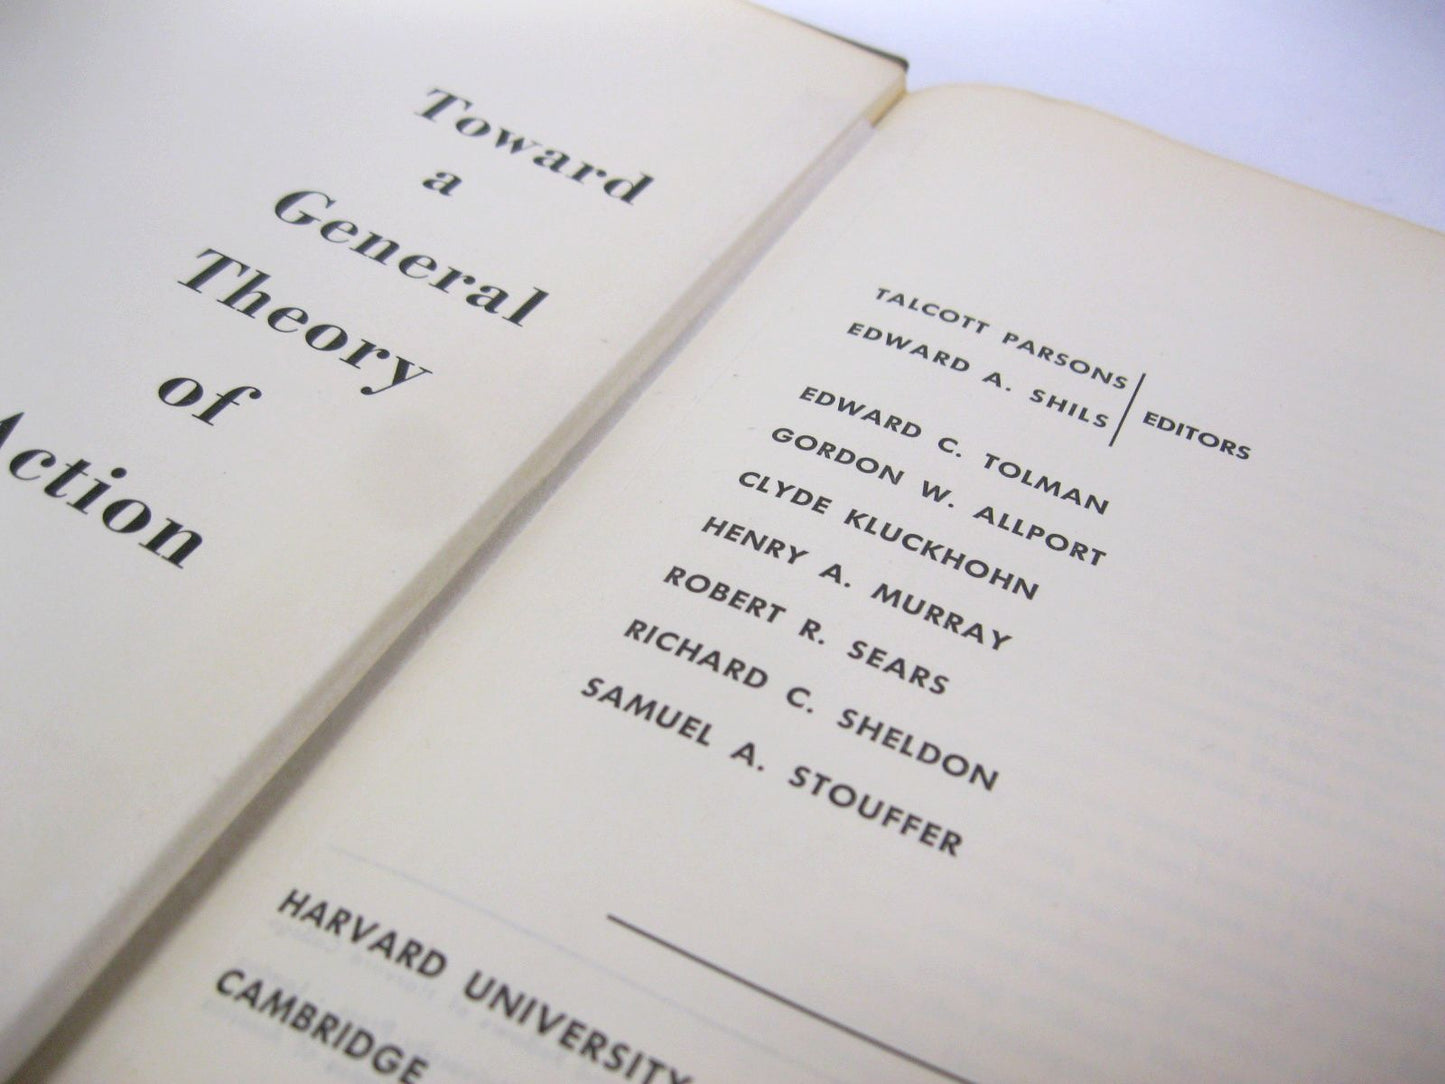 Toward a General Theory of Action edited by Talcott Parsons and Edward A. Shils